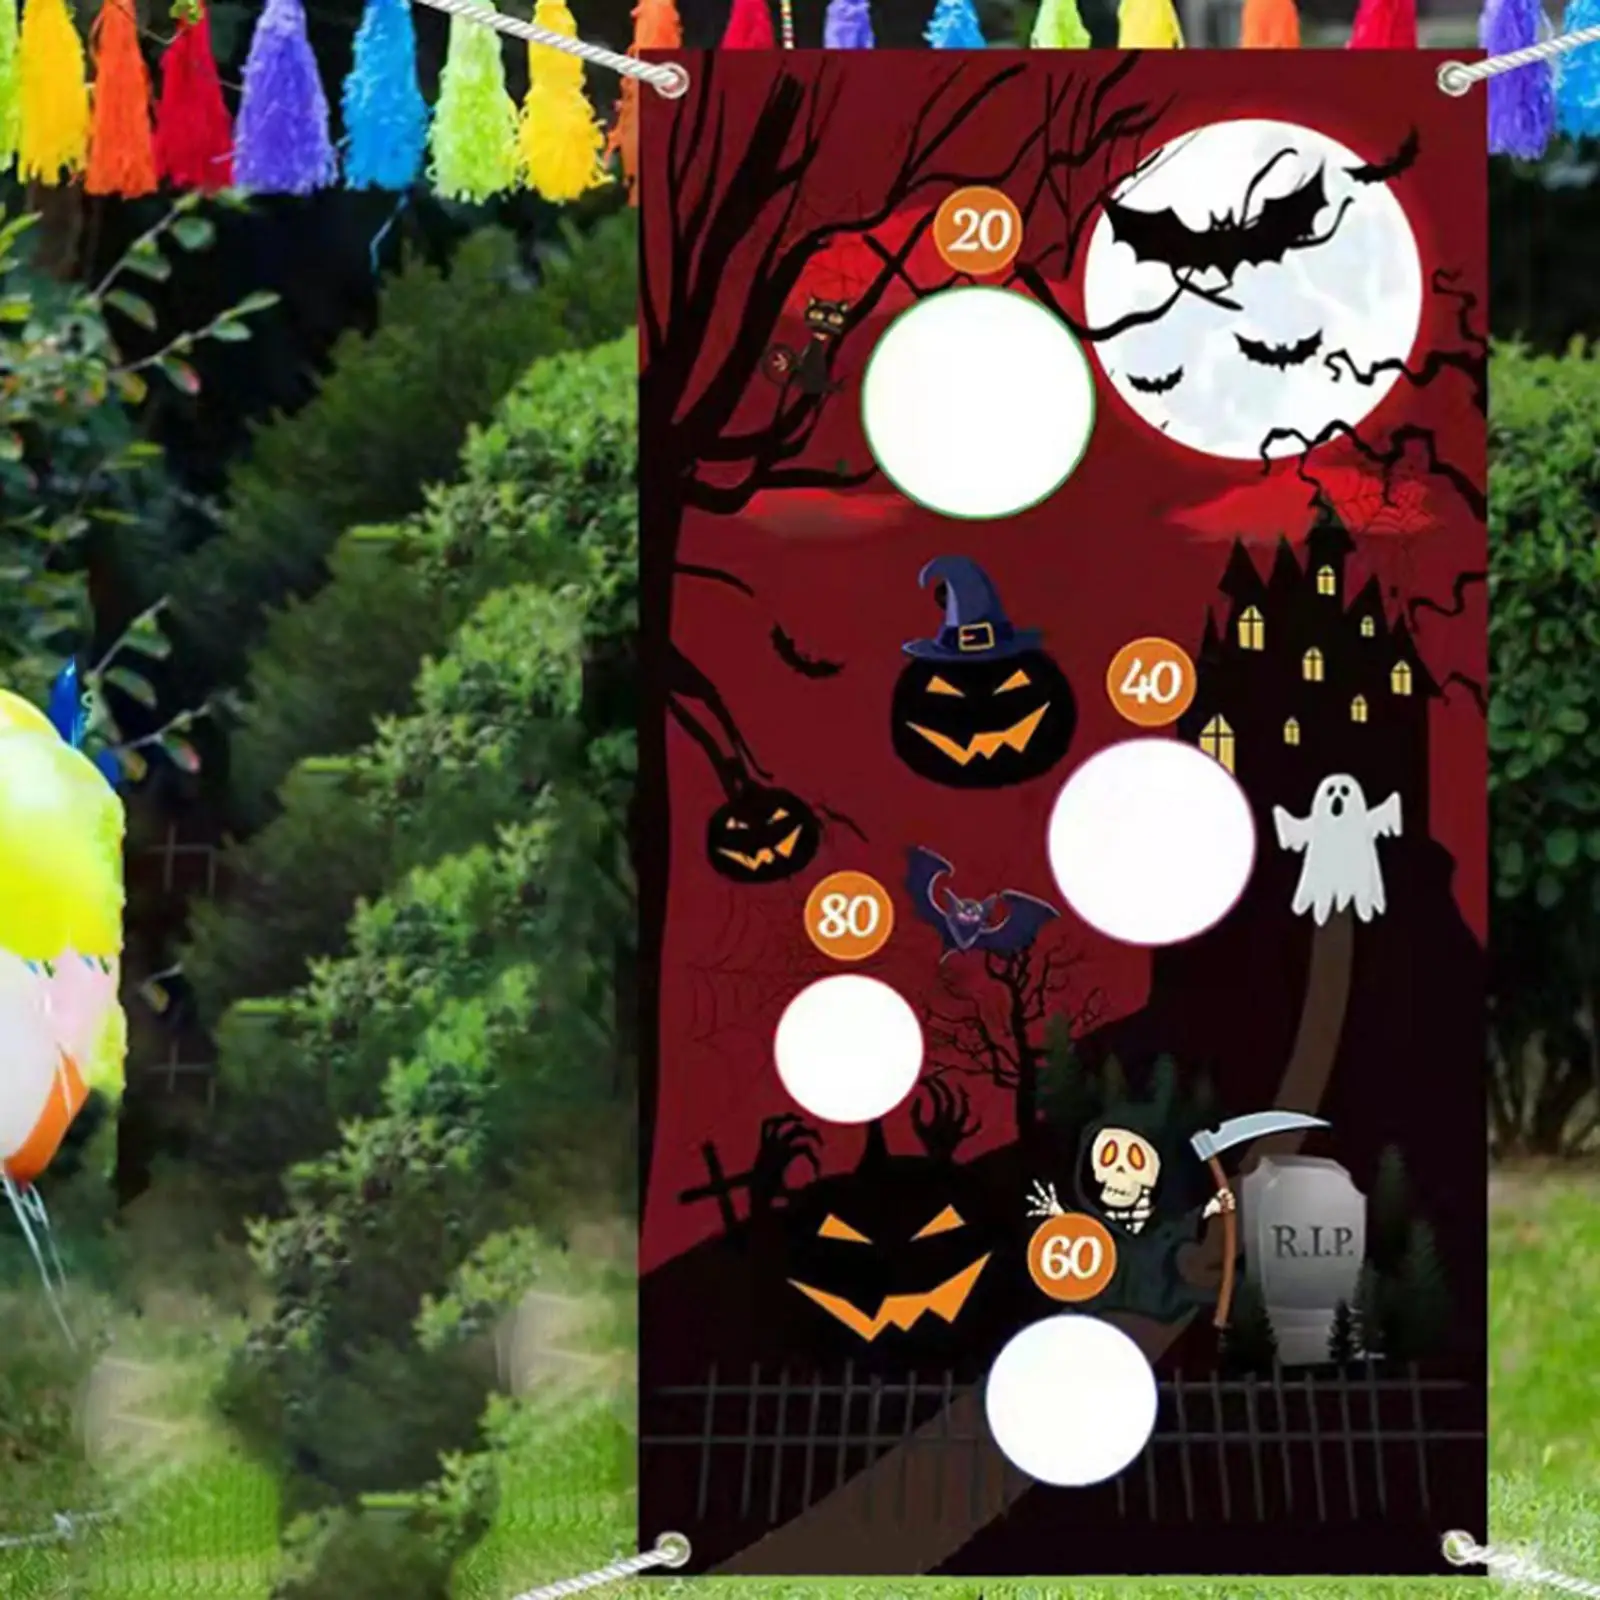 Pumpkin Halloween Toss Game Family Gathering Games Toys Toss Games Banner Set for Activities Camping Outside Indoor